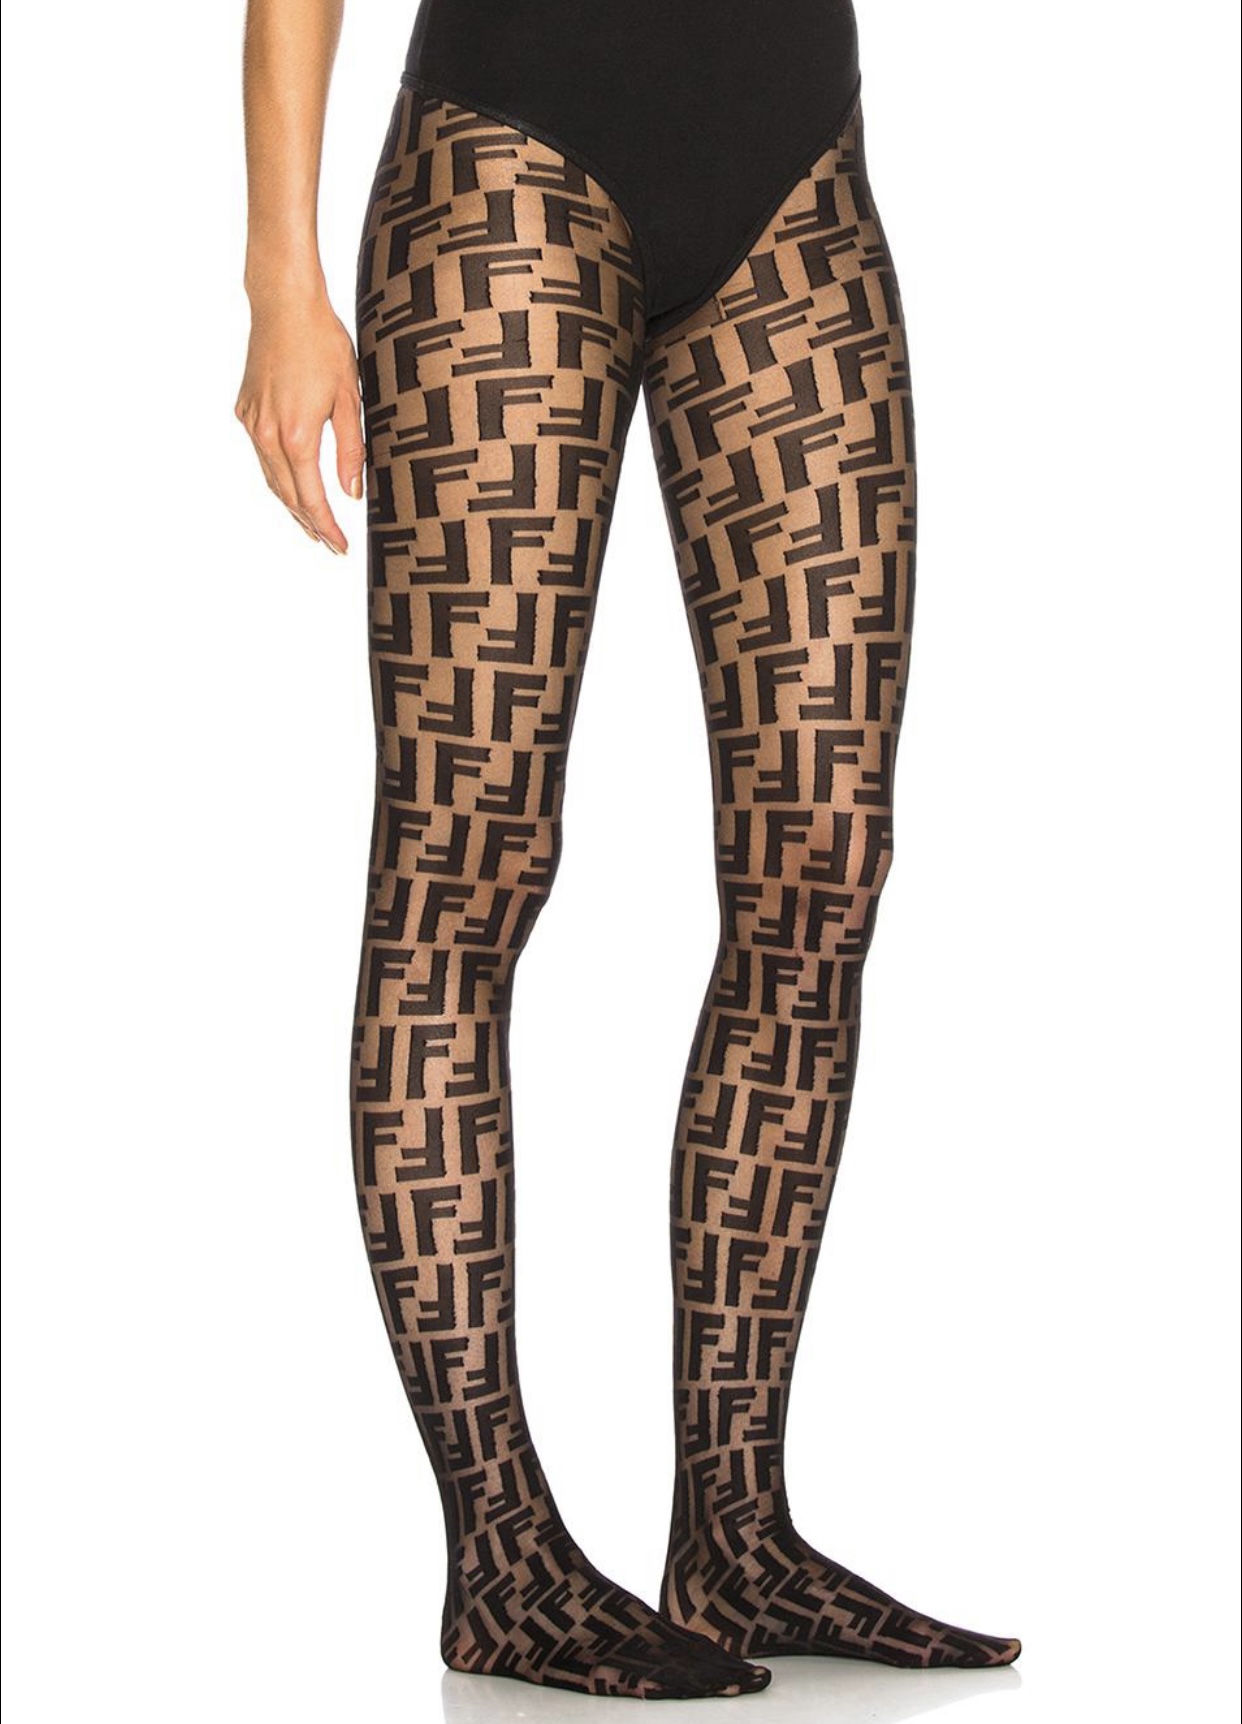 Gucci for Women FW23 Collection  Black gucci tights, Gucci tights,  Patterned tights